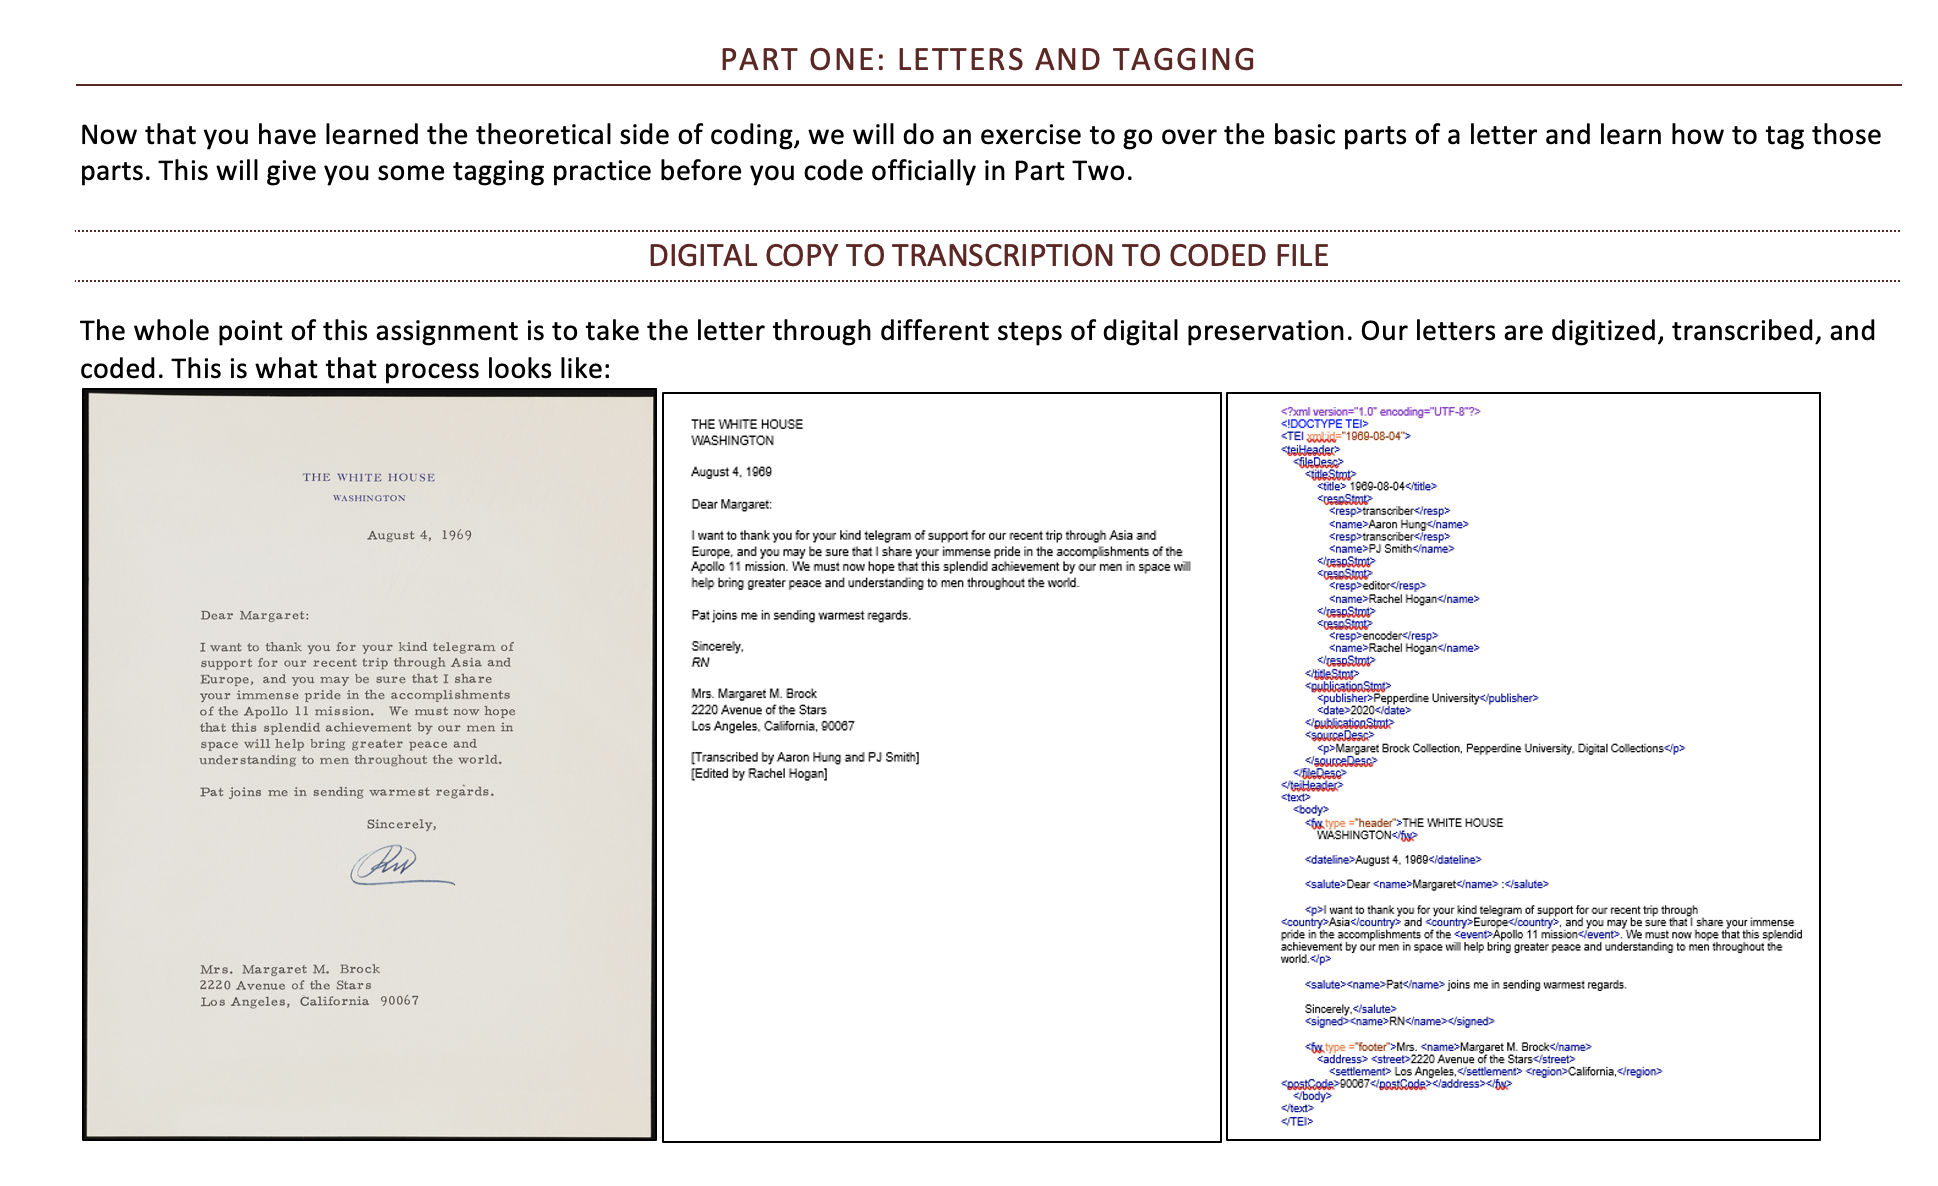 Three images side-by-side-by-side. The first is a digital facsimile of a letter; the second is a copy of that letter transcribed into a Word document, and the third is a copy of that same letter with xml tags added.